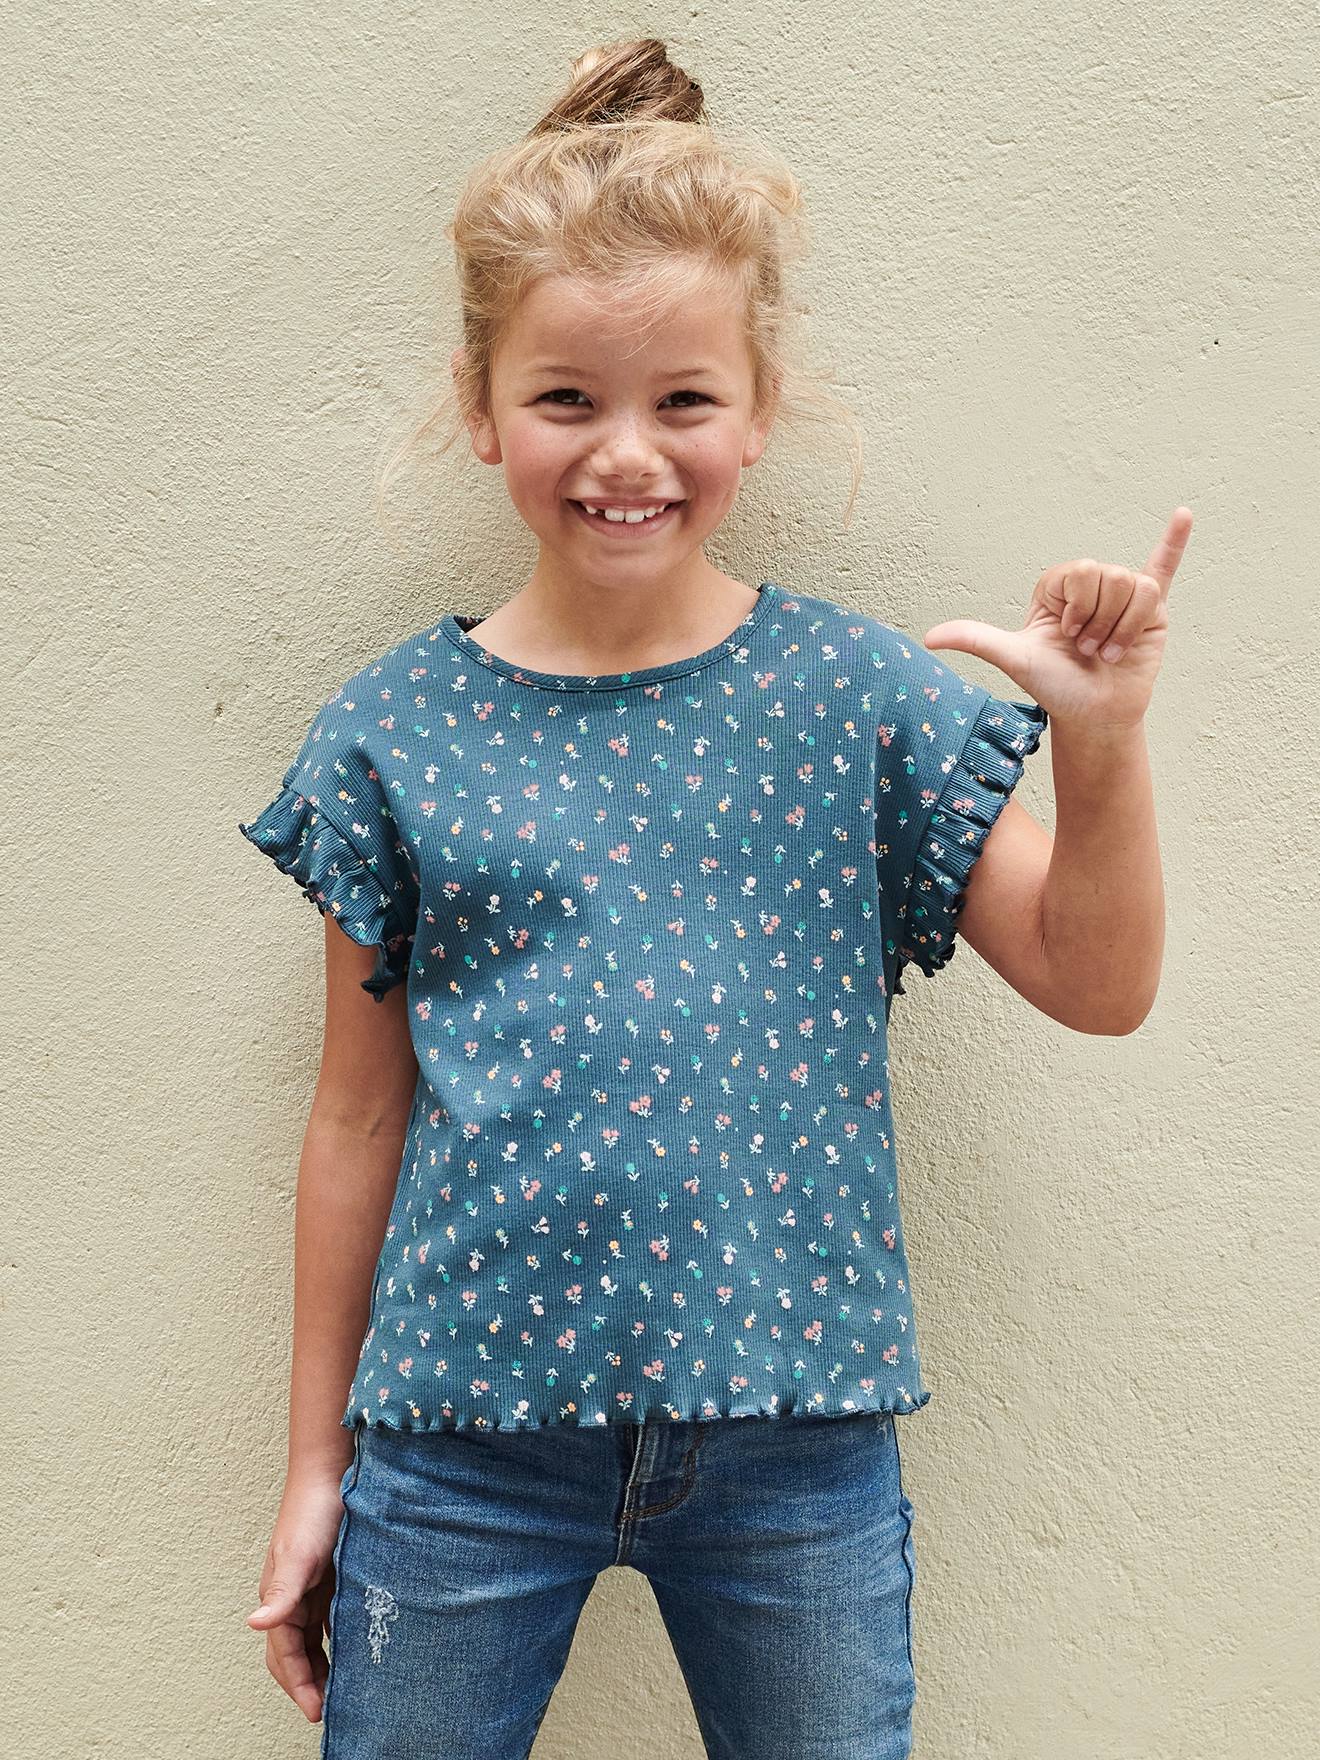 Rib Knit T-Shirt with Printed Flowers for Girls - ink blue